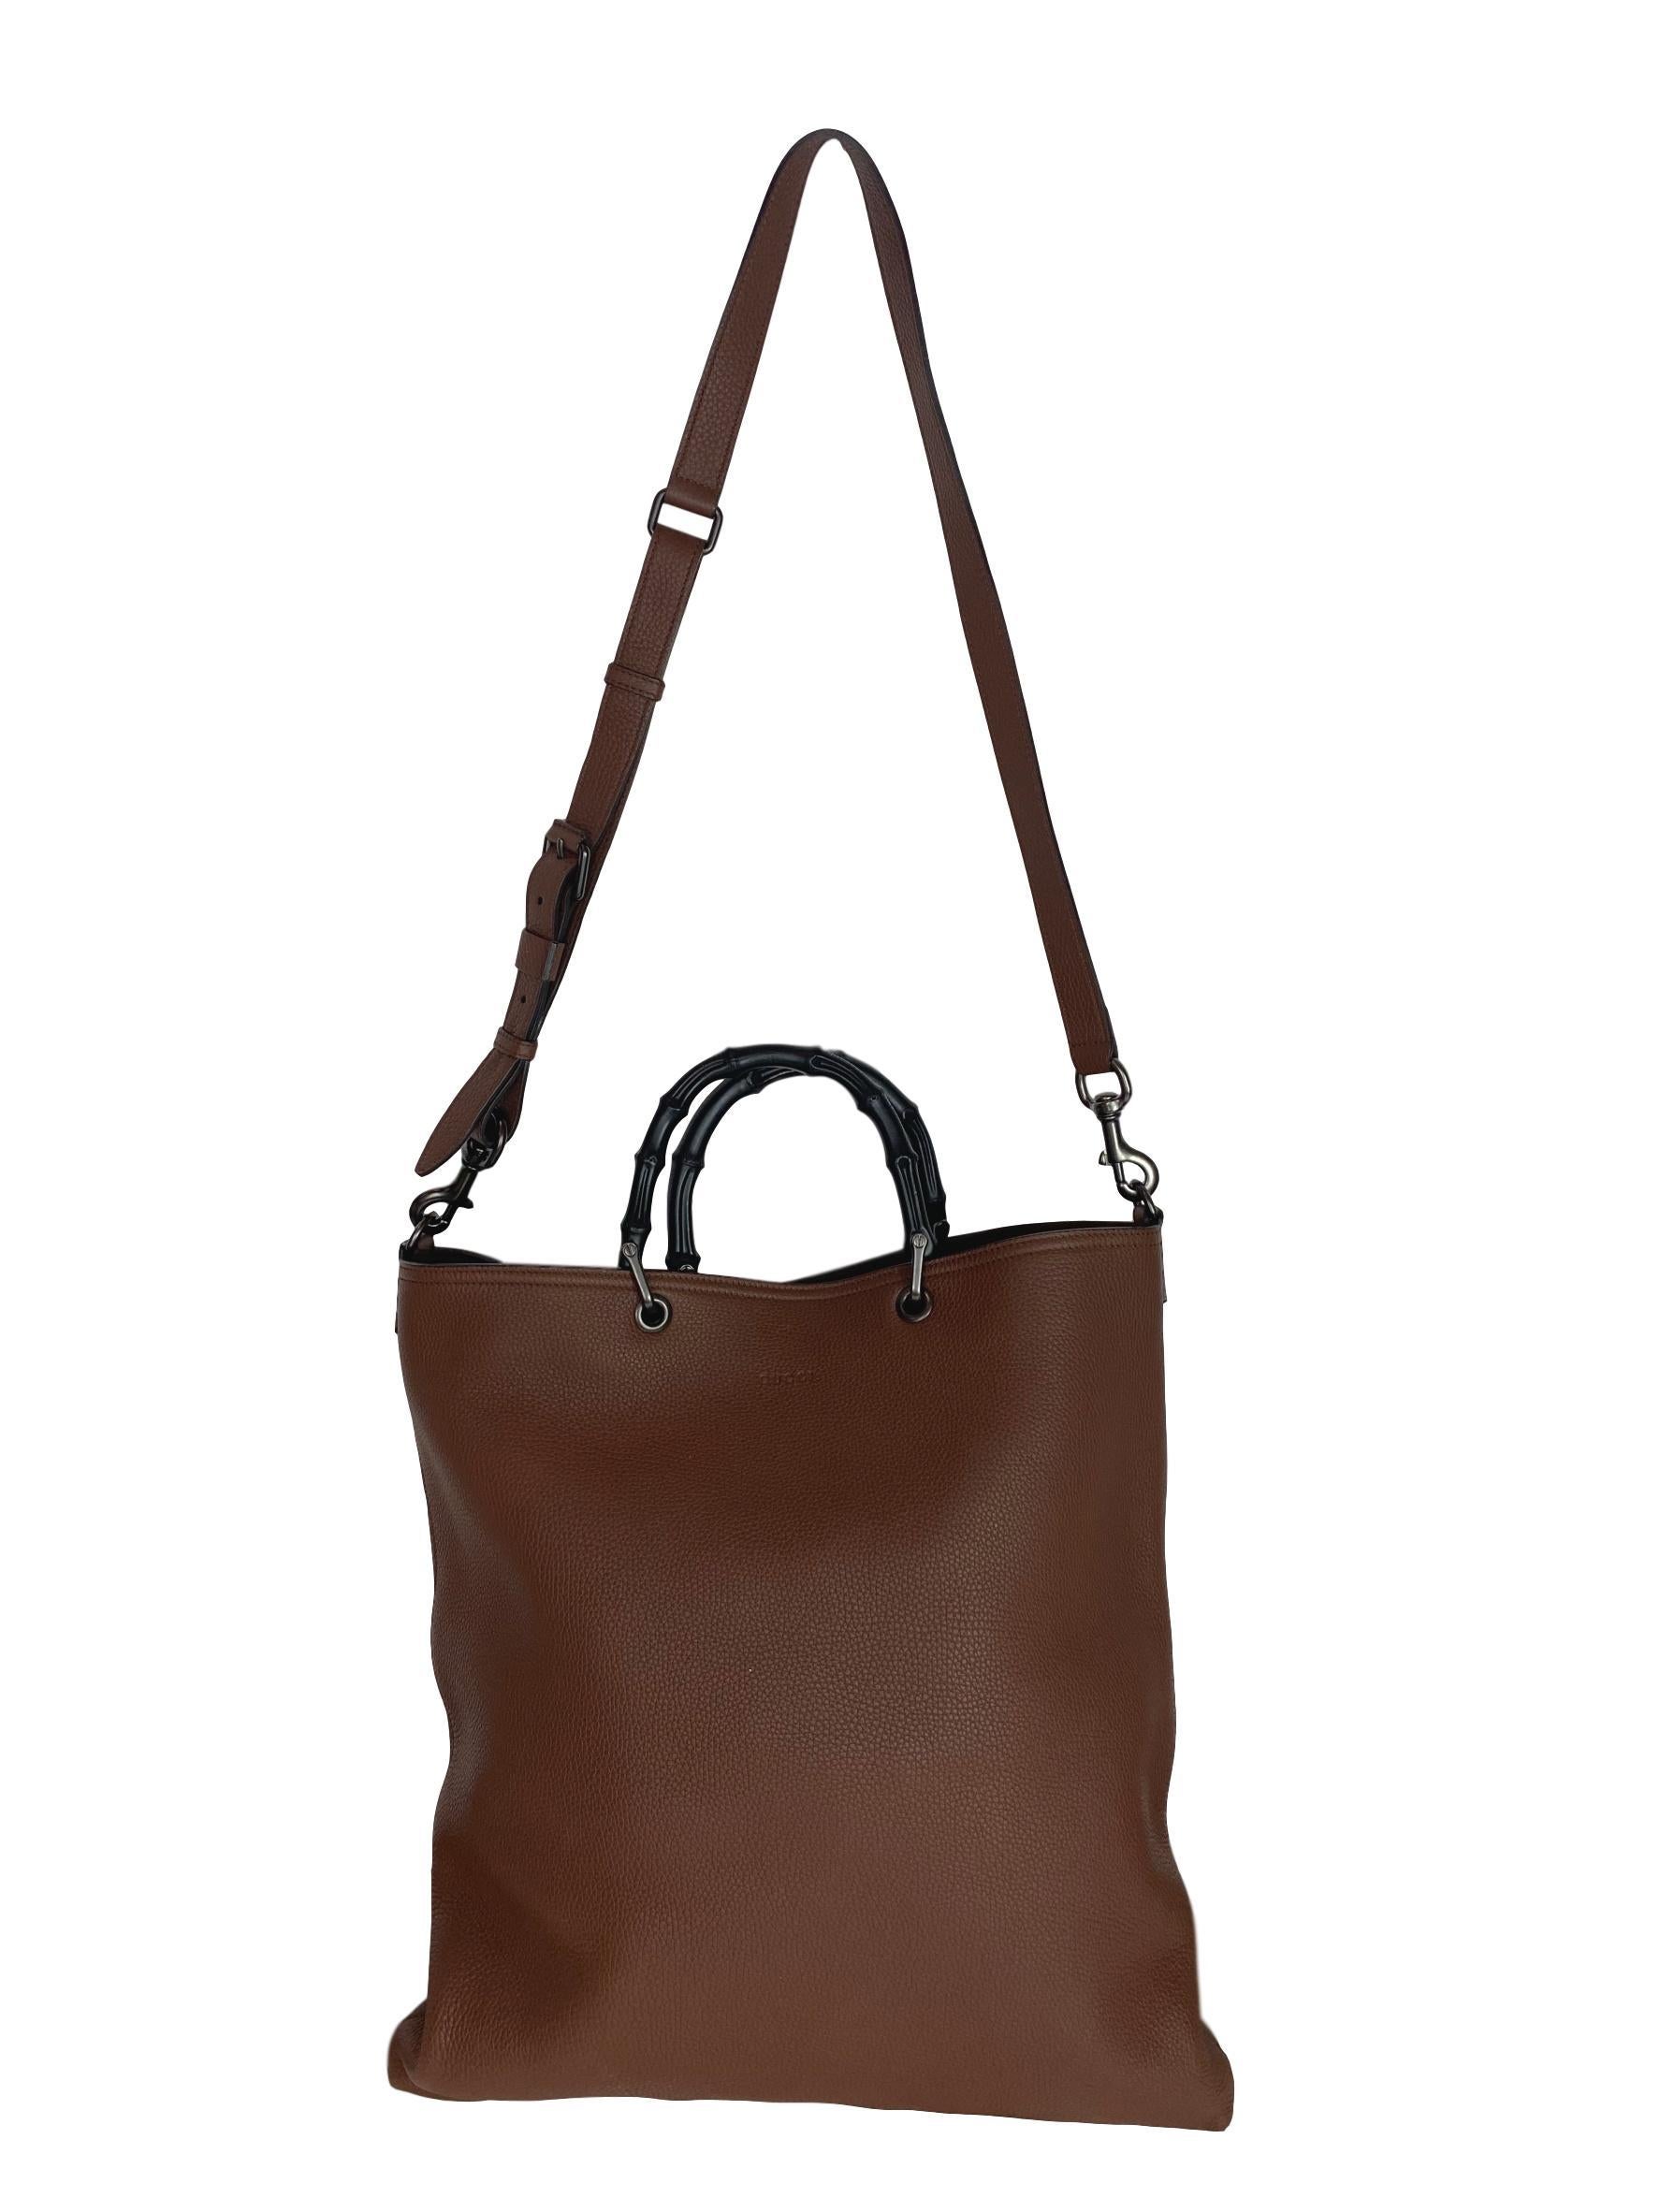 Gucci Bamboo Brown Large Shopper Tote with Strap, circa 2018. This large shopper tote comes in a rich brown pebble leathered material, double black painted bamboo handles and a detachable shoulder strap. This bag has a beautiful suede lined interior